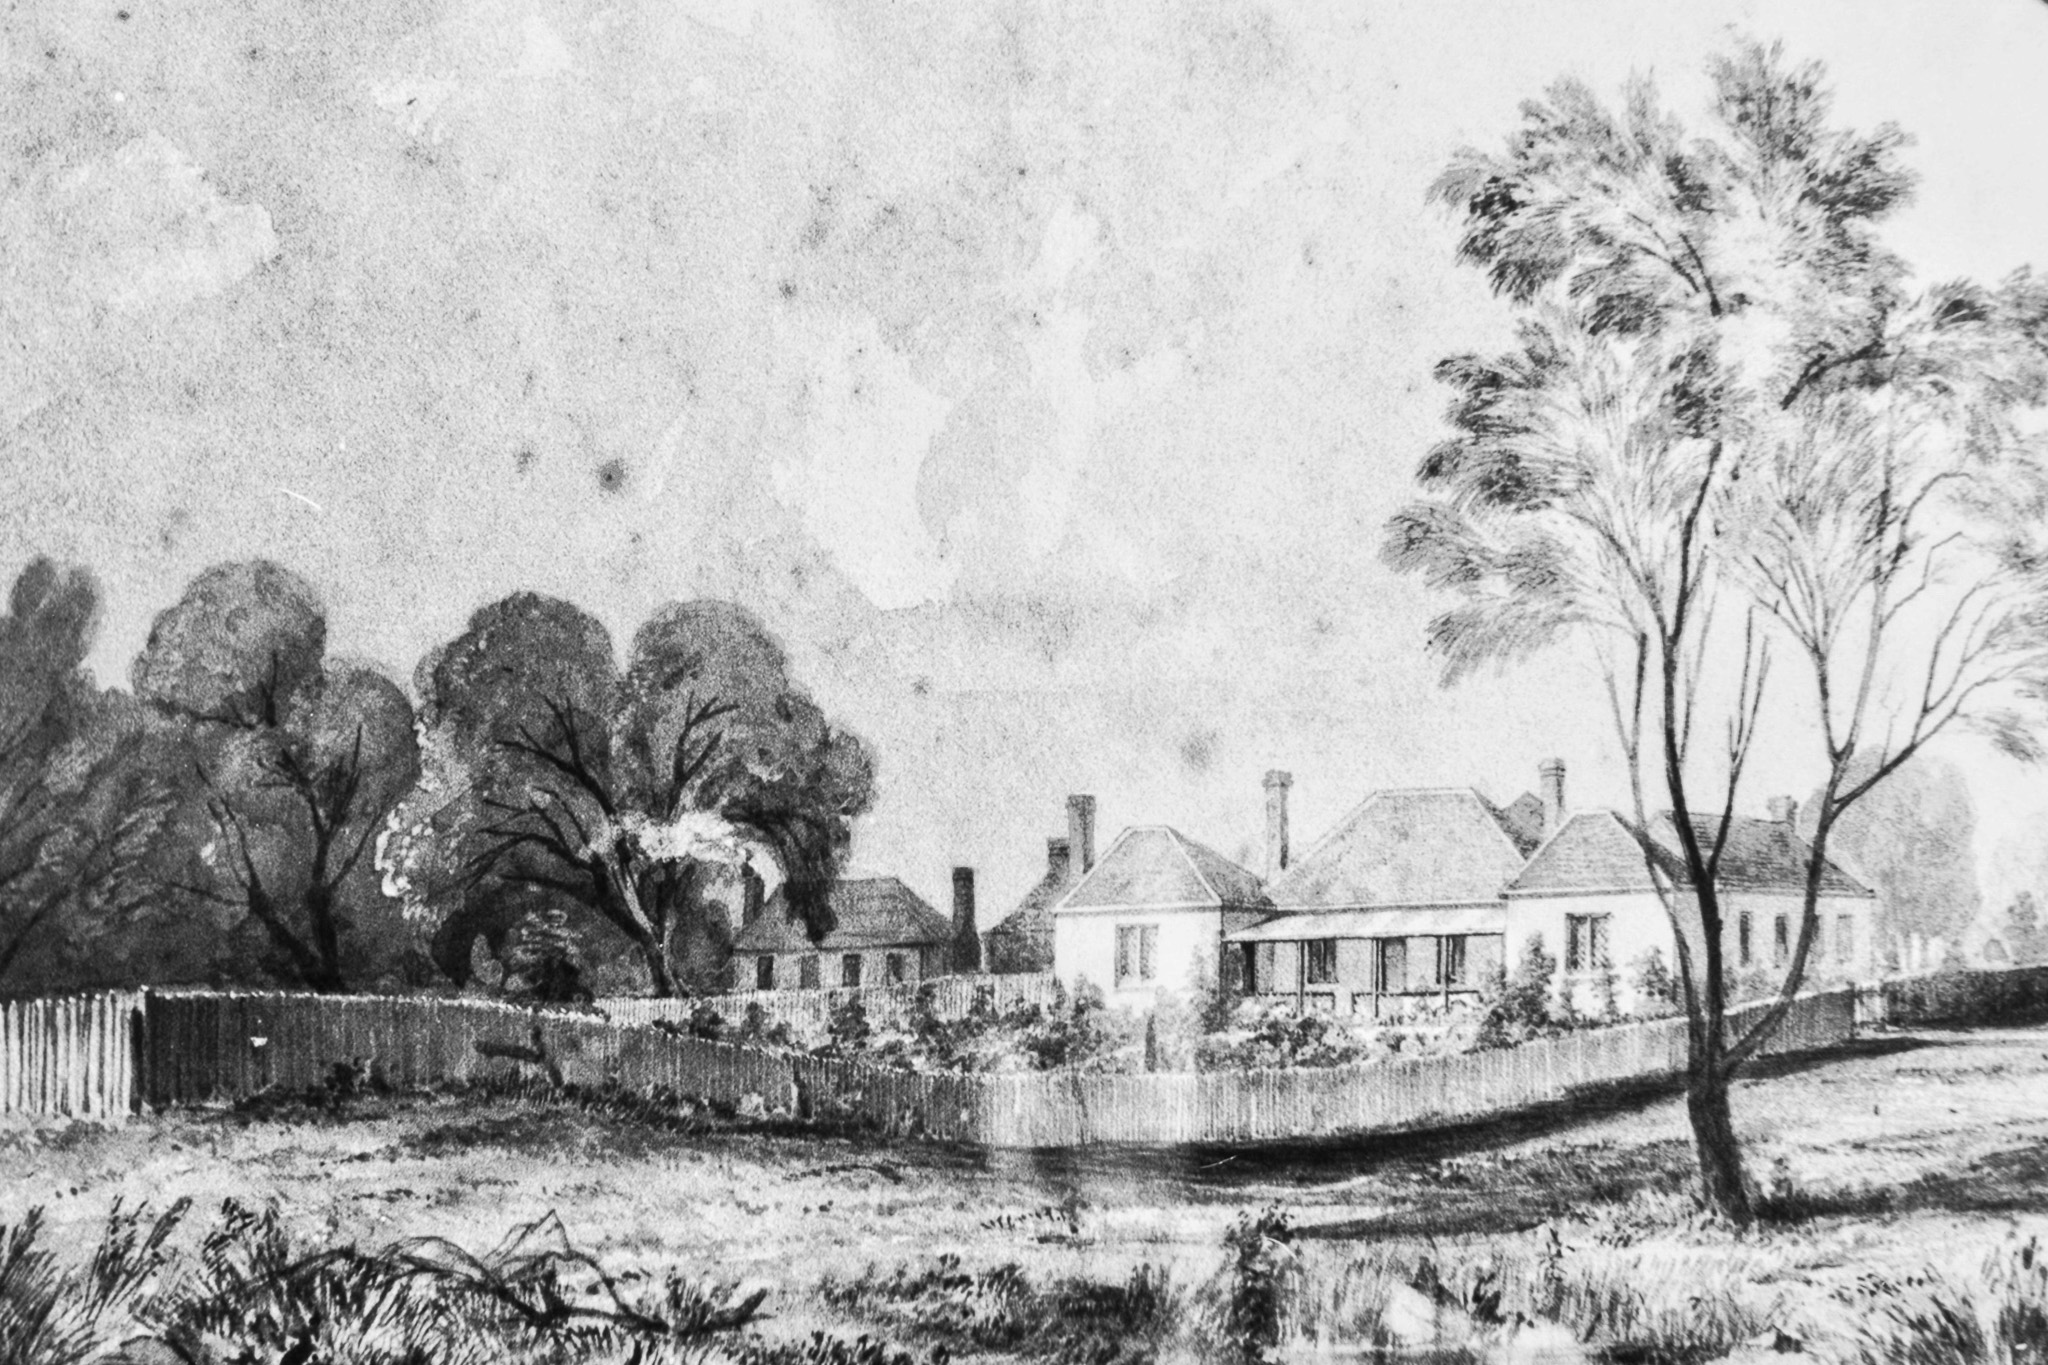 1842 rendering of the original timber homestead. Source: State Library of NSW, Altona Laverton Historical Society.